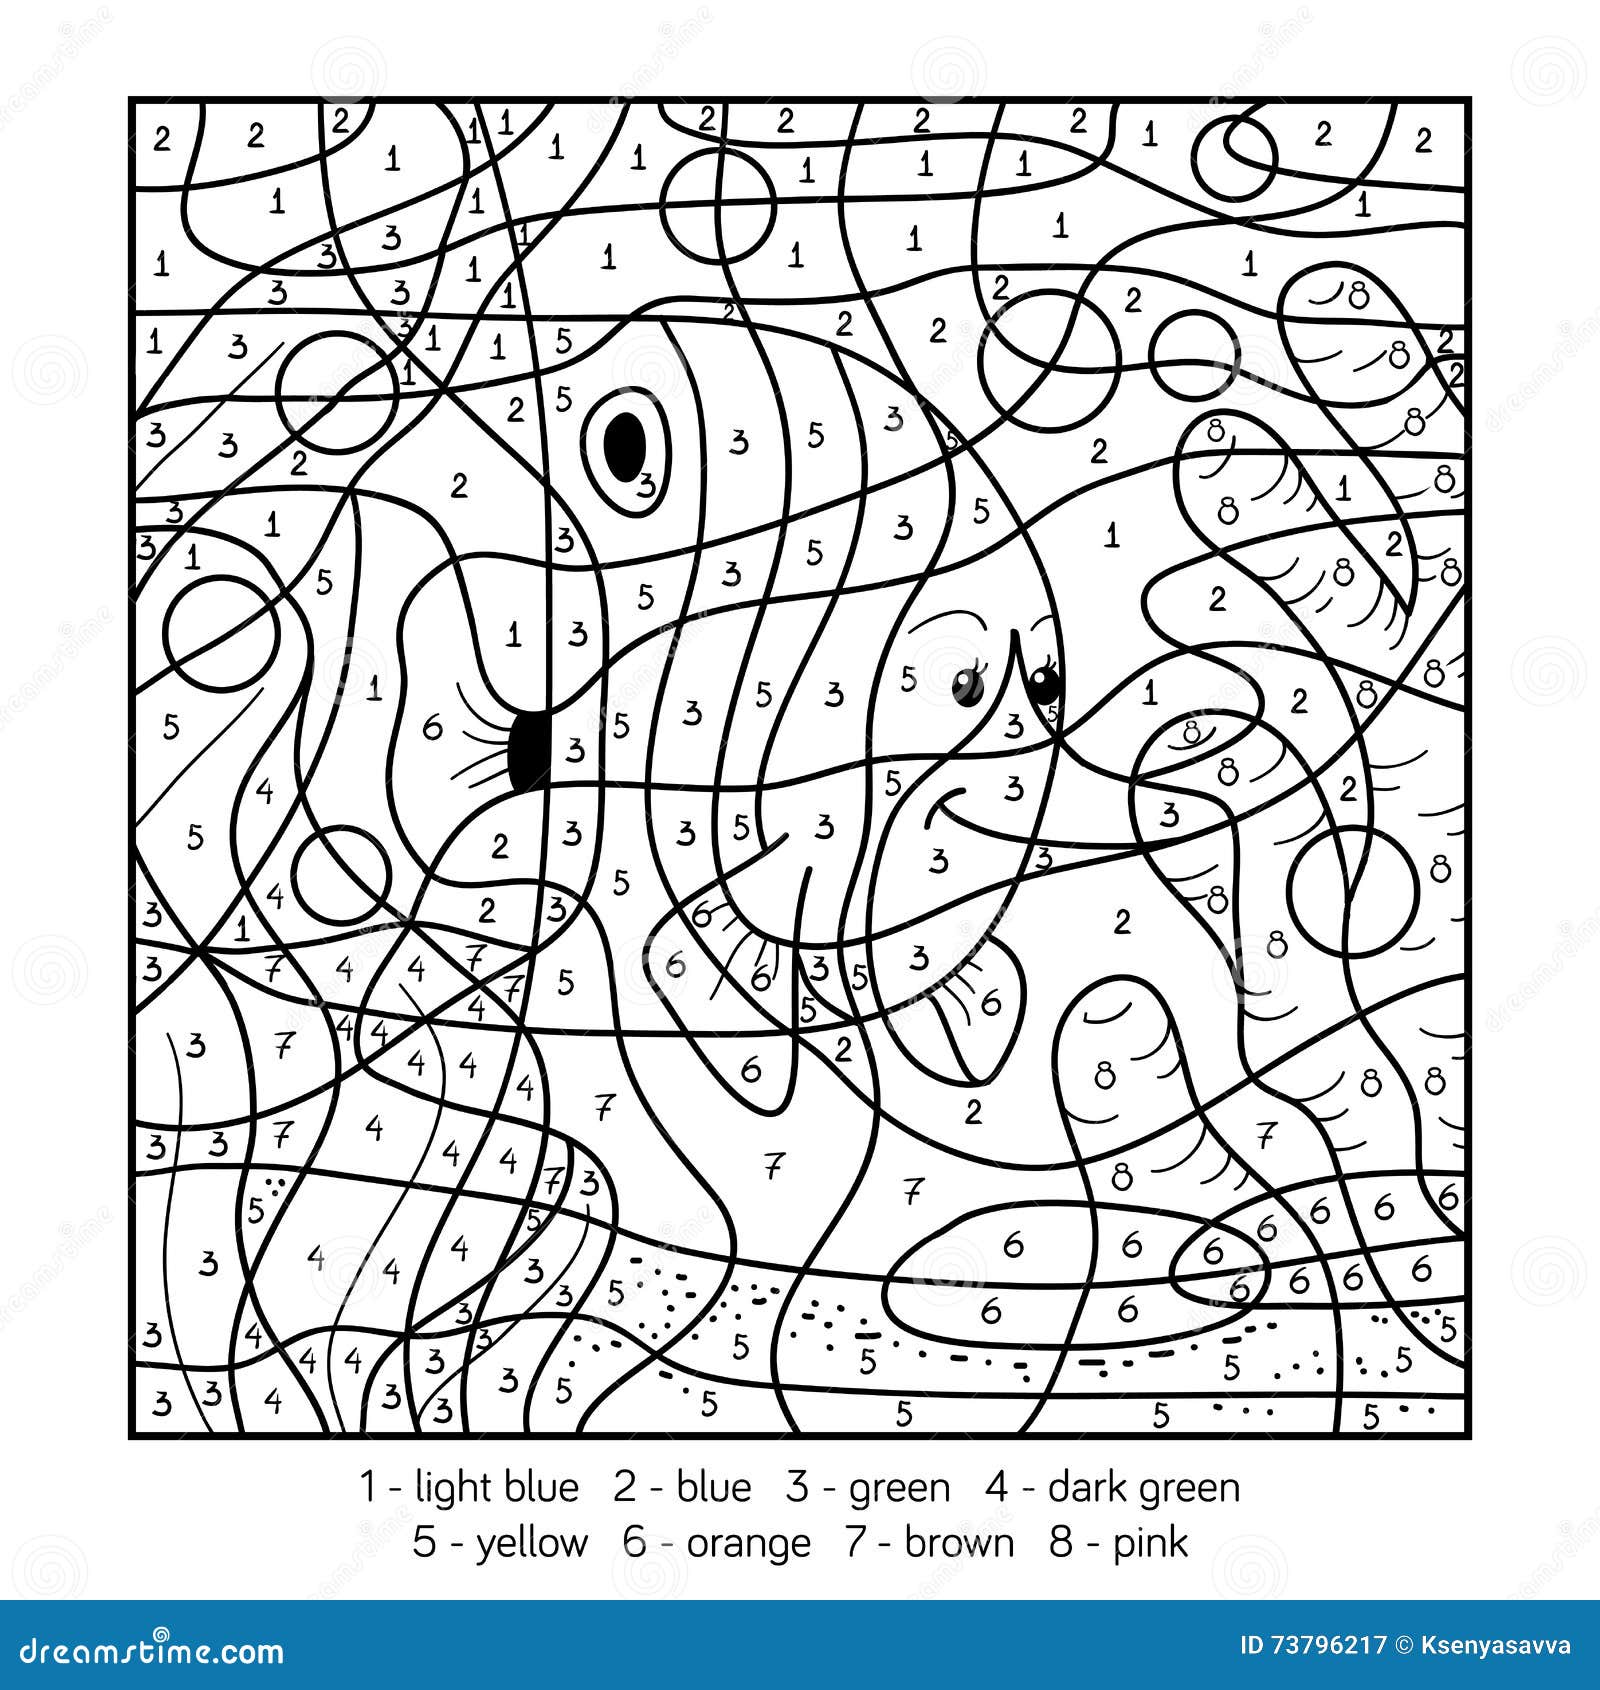 Colouring Game Numbers - Children Educational Game Coloring Page With